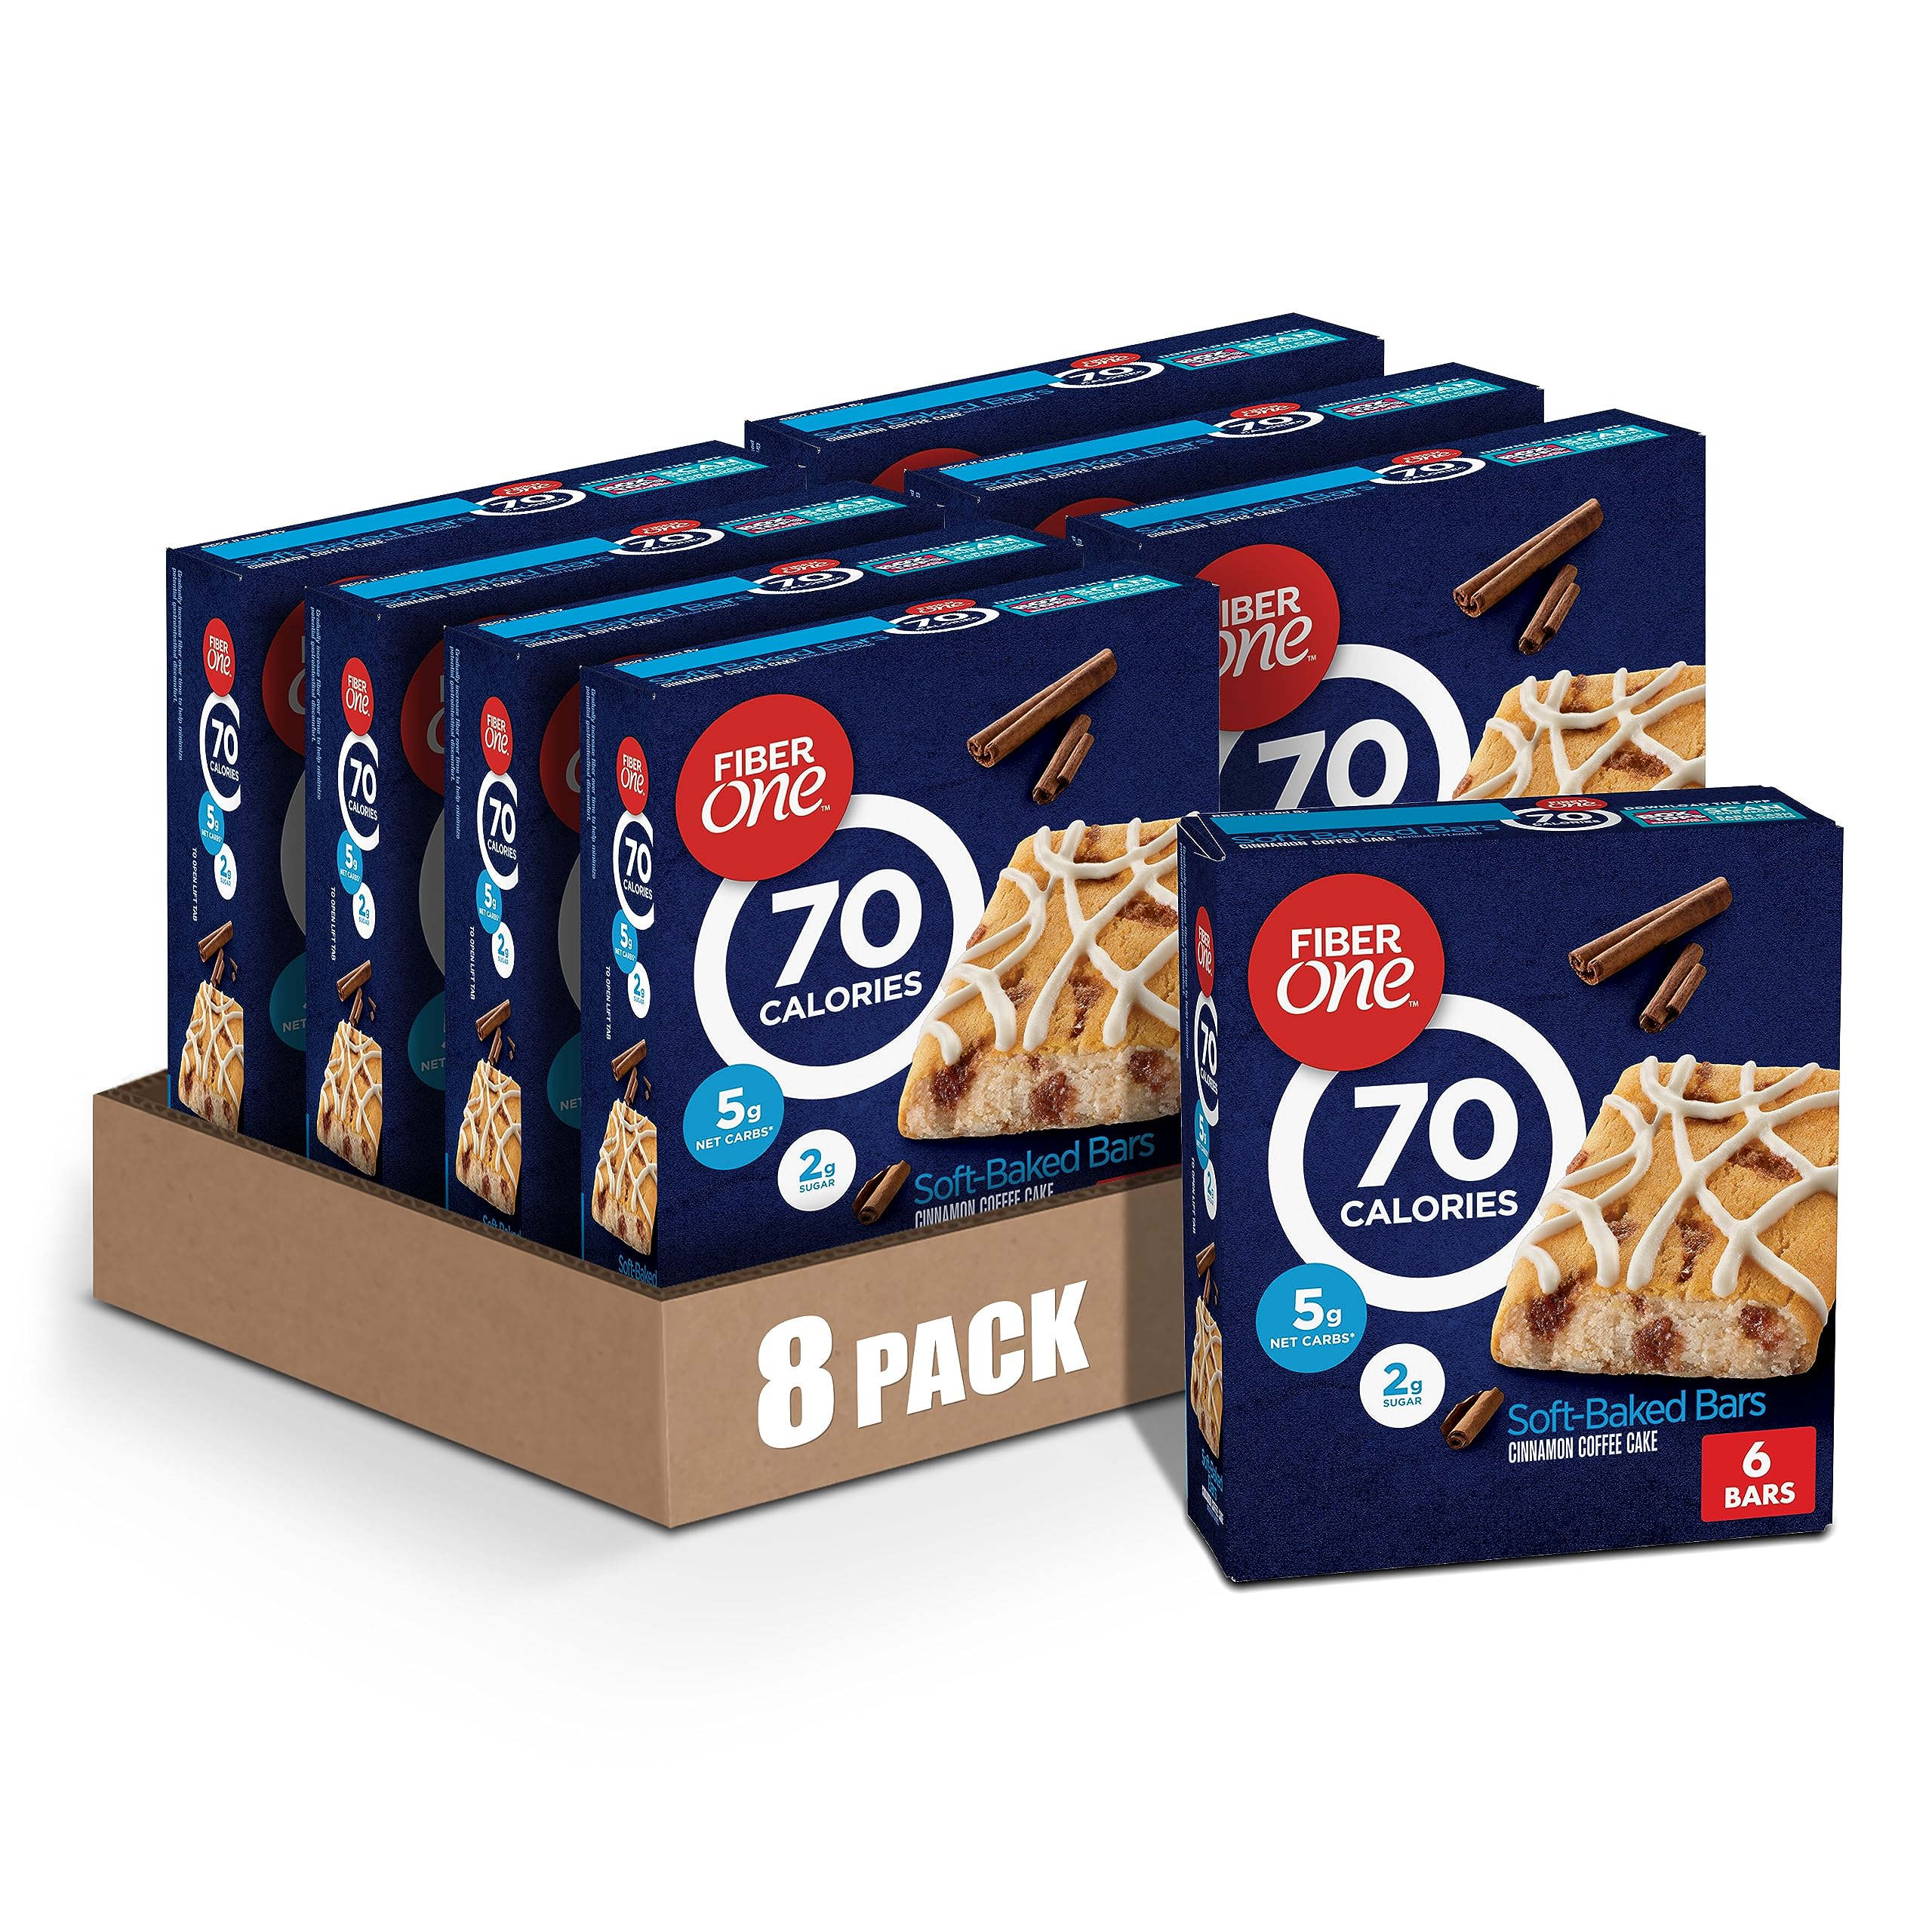 8-Pack 6-Count Fiber One 70 Calorie Soft-Baked Bars (Cinnamon Coffee Cake) $15.12 w/ S&S + Free Shipping w/ Prime or on $35+